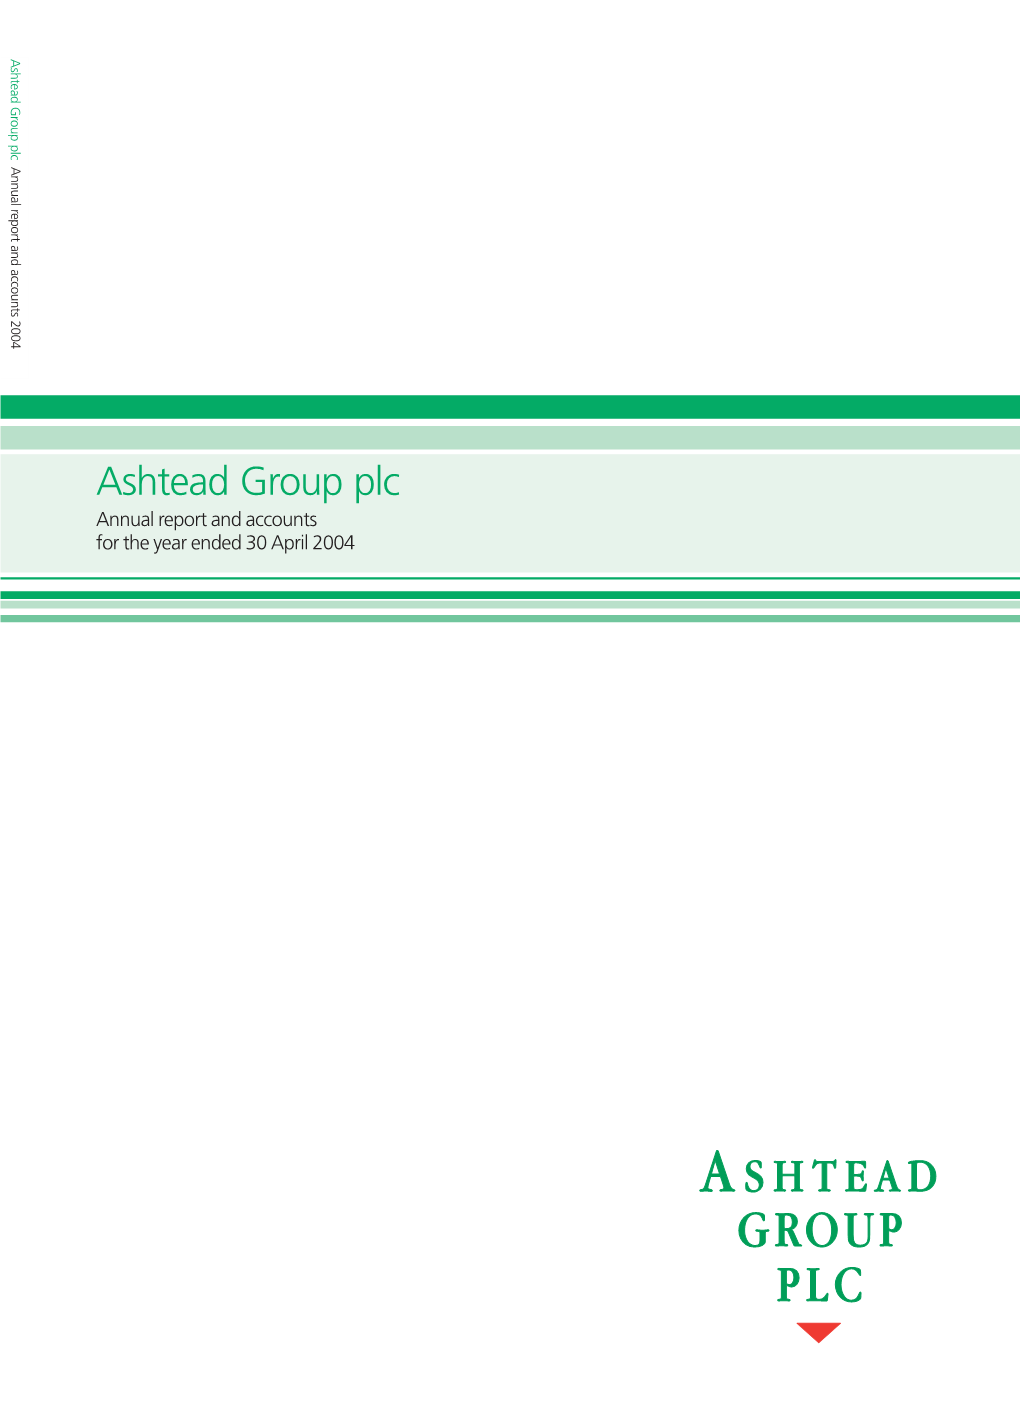 Ashtead Group Plc Annual Report and Accounts 2004